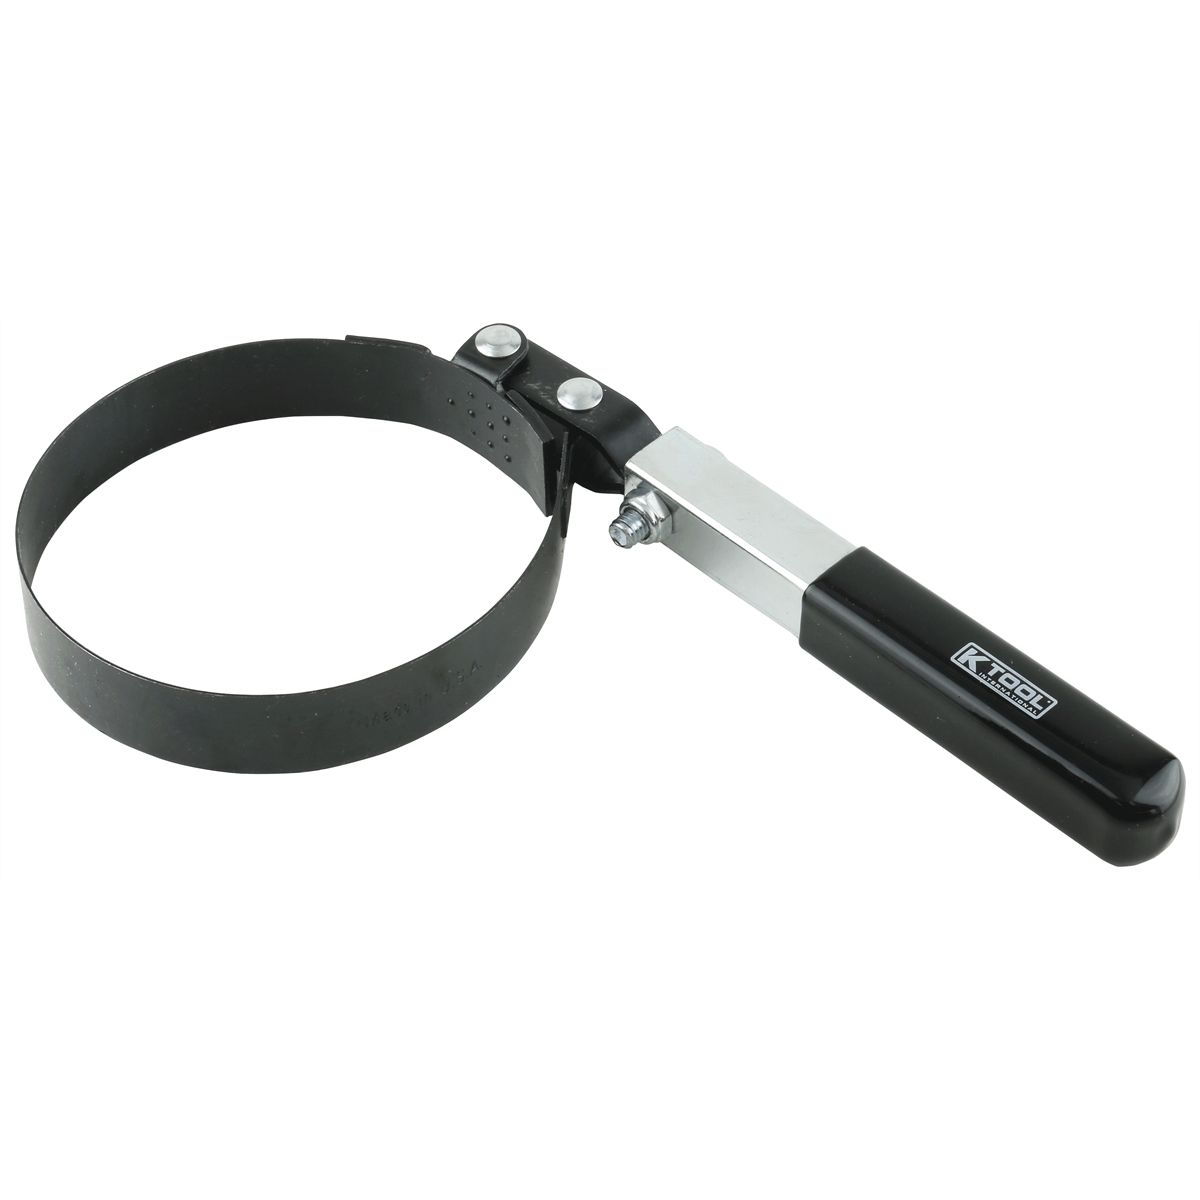 Swivel Handle Oil Filter Wrench 2-7/8 - 3-1/4 In